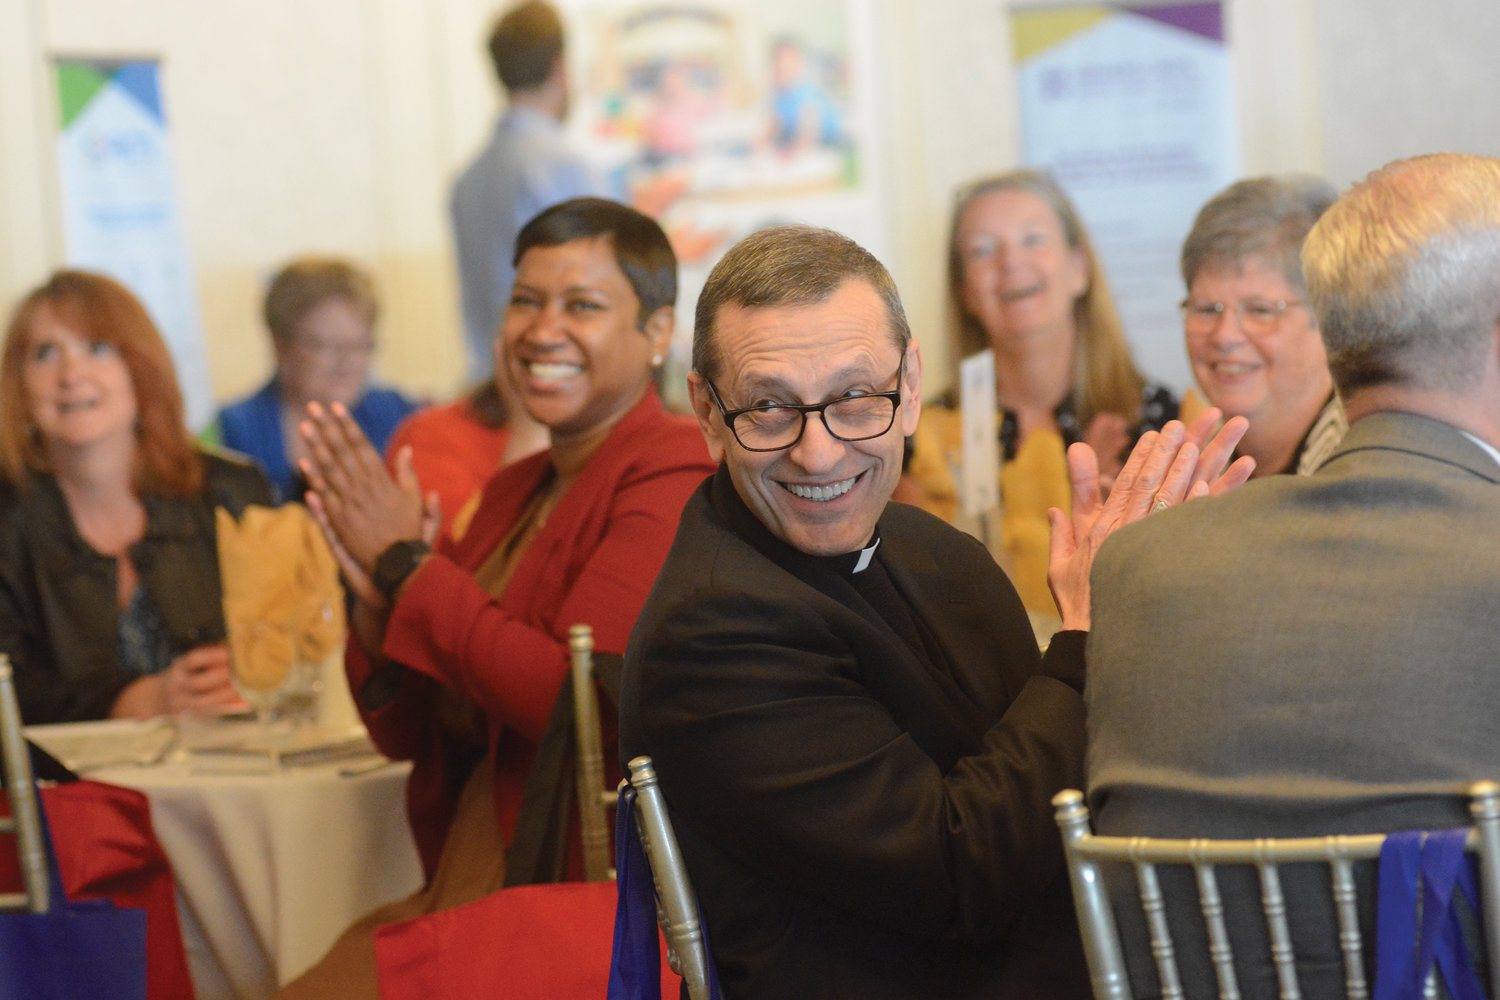 Bishop Frank Caggiano of the Diocese of Bridgeport, Conn., applauds May 25 during the spring principals’ meeting at Marina del Rey in the Bronx, where he was the principal speaker.